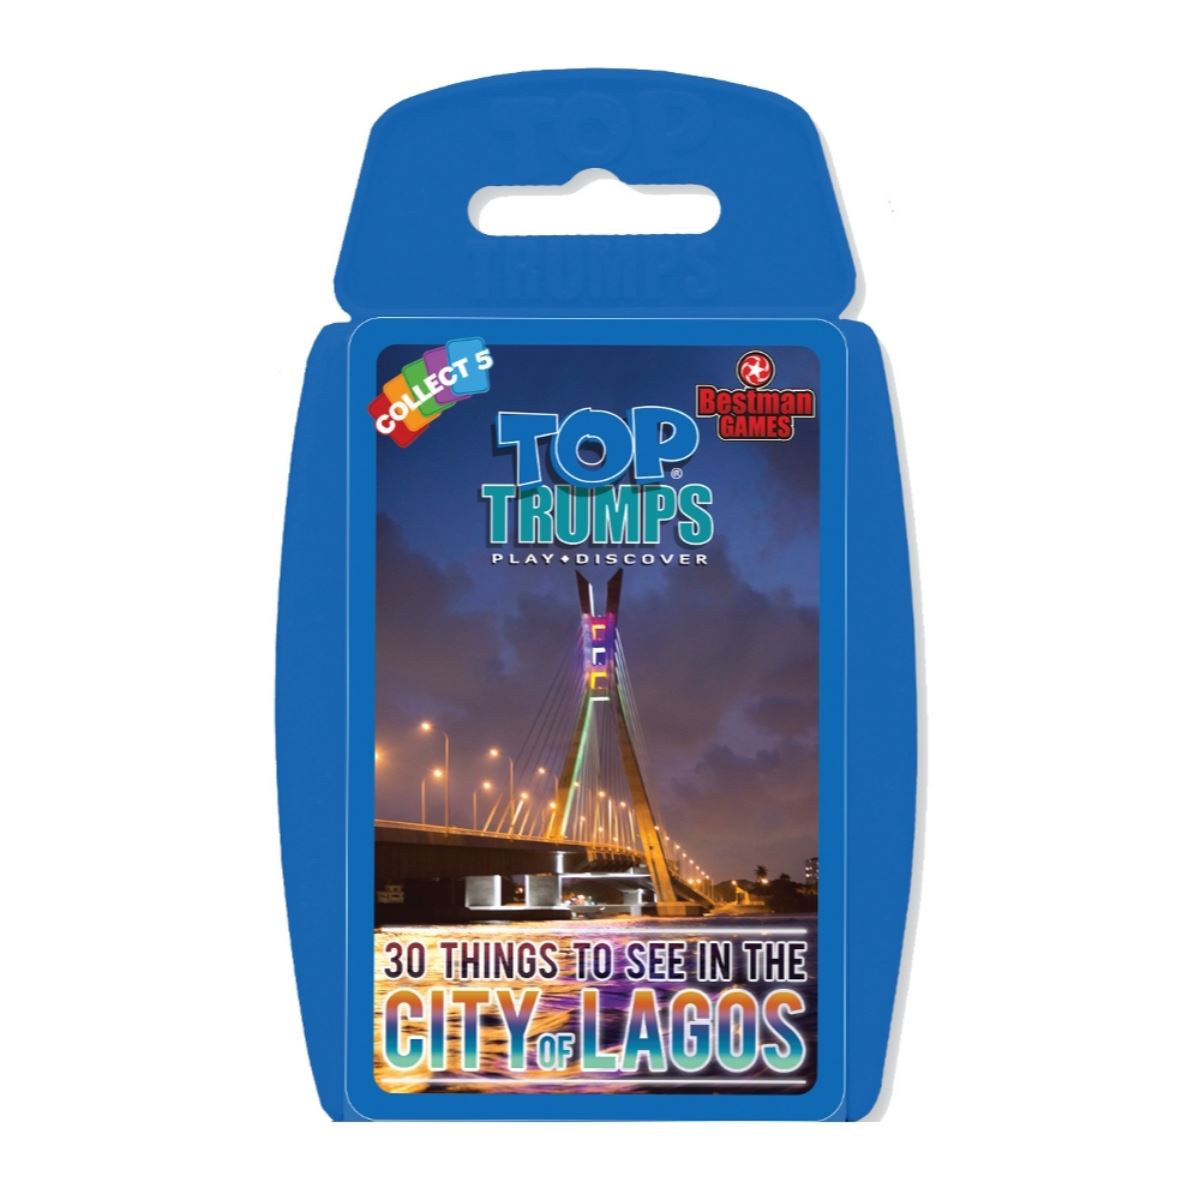 City of Lagos Top Trumps Card Game